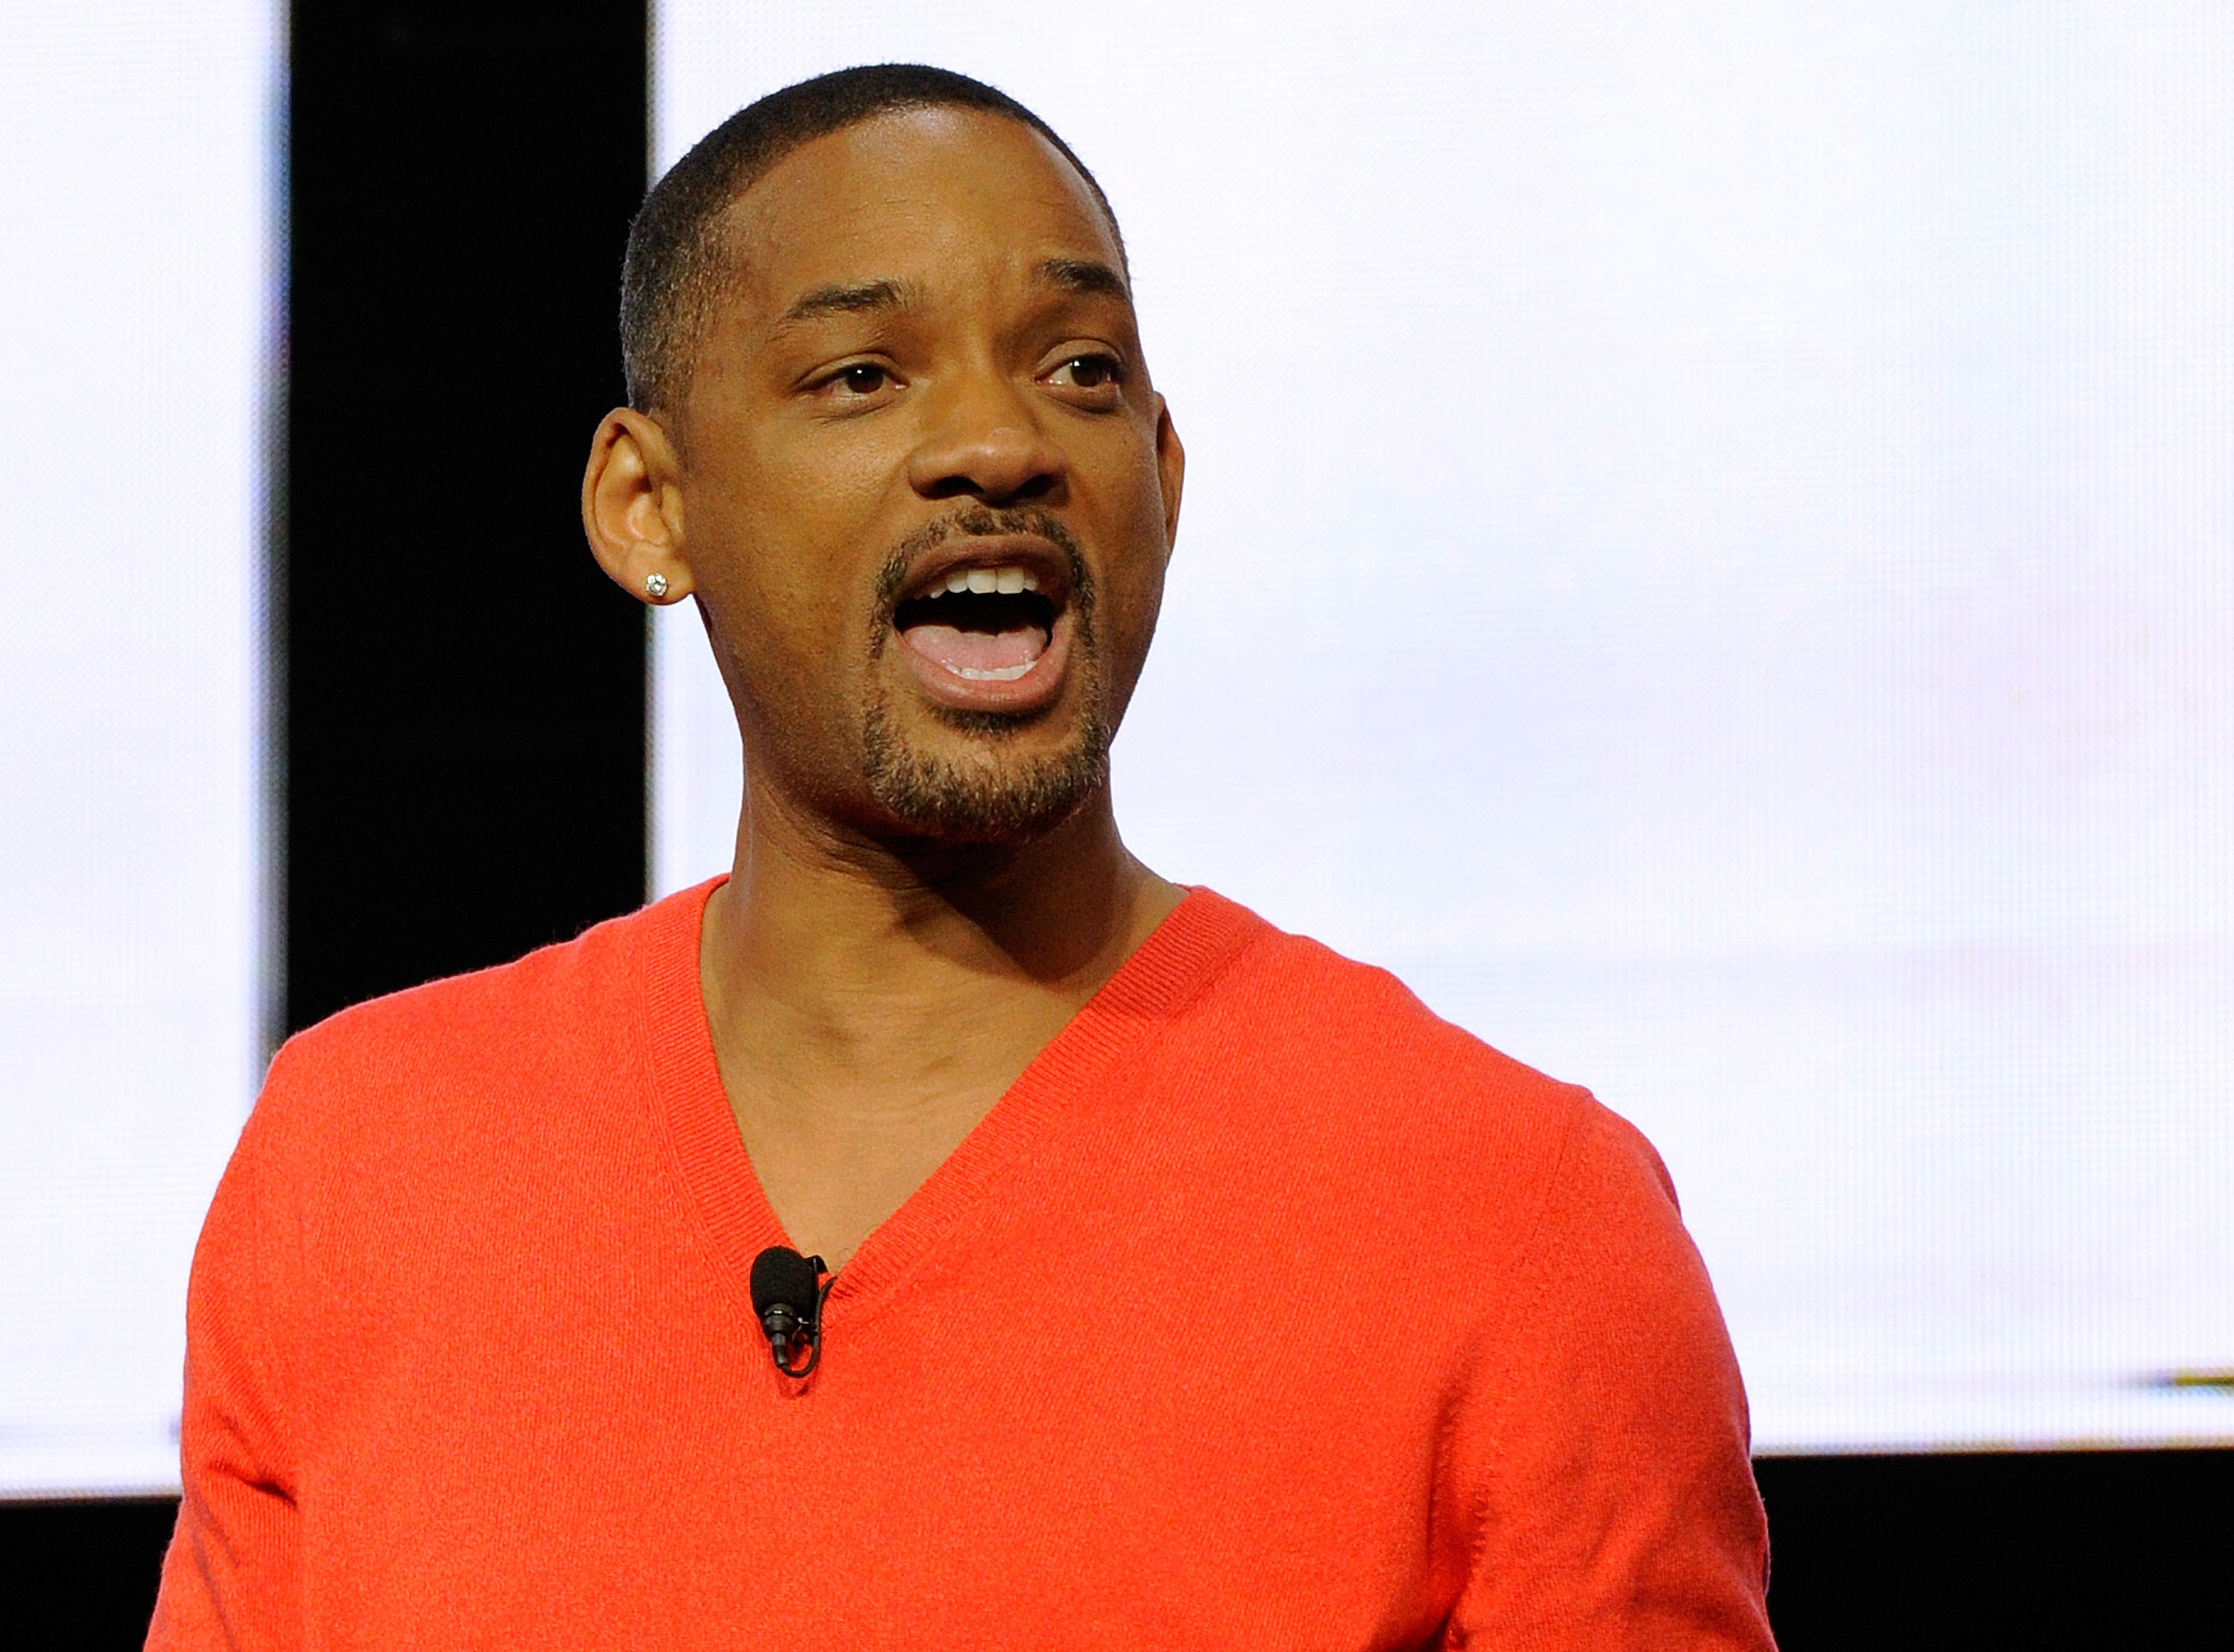 Suicide Squad Cast: Will Smith and Jared Leto lead an all star